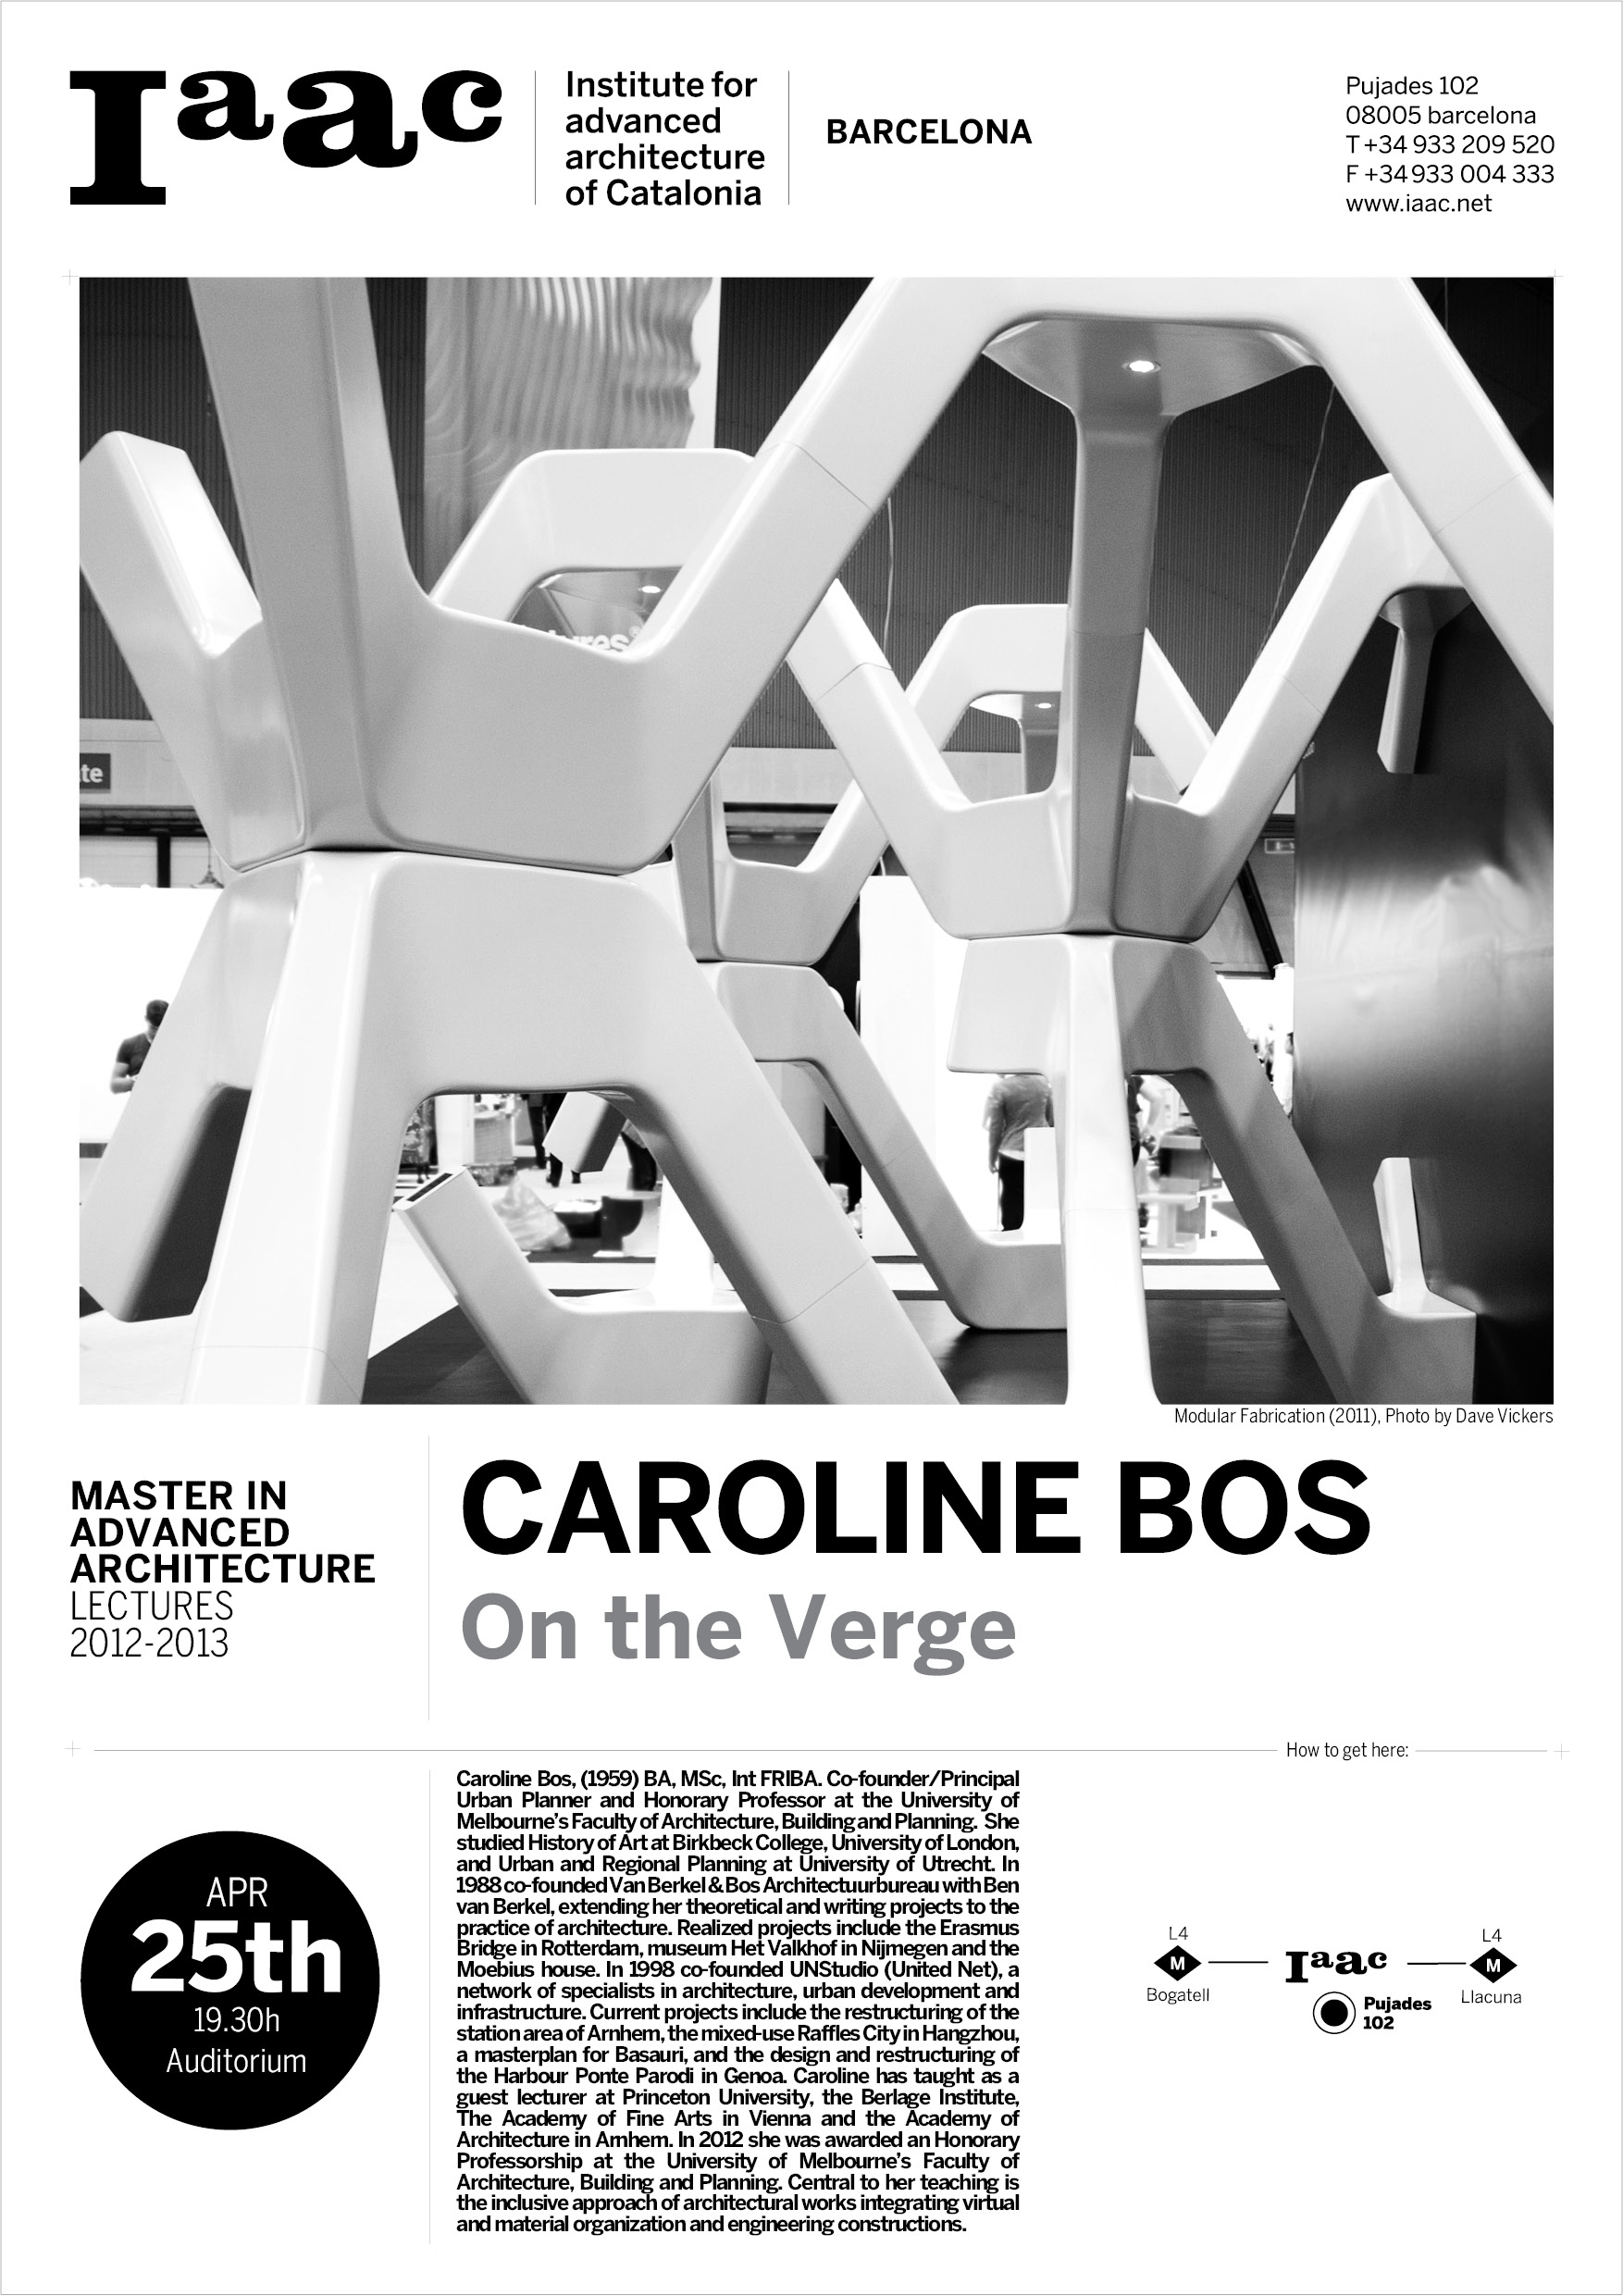 Next Lecture at Caroline Bos from – IAAC